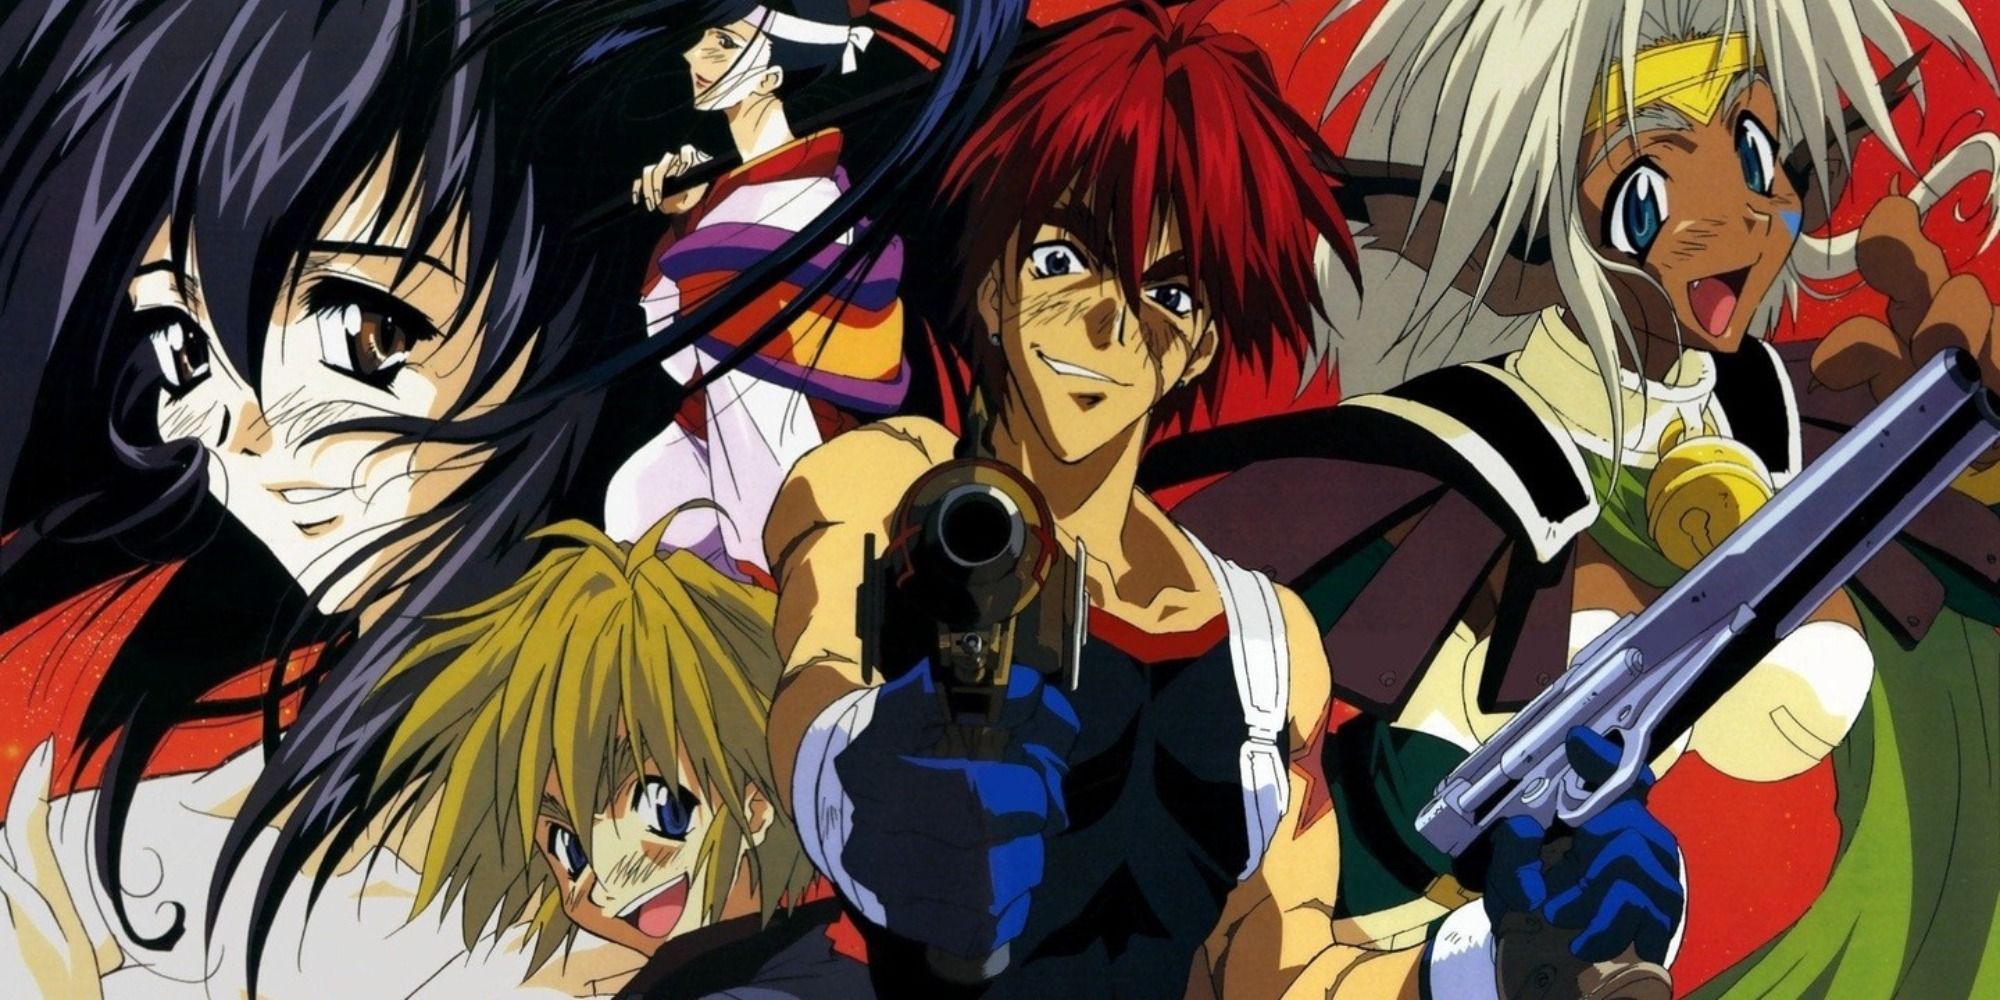 The cast of Outlaw Star posing together in the anime's poster